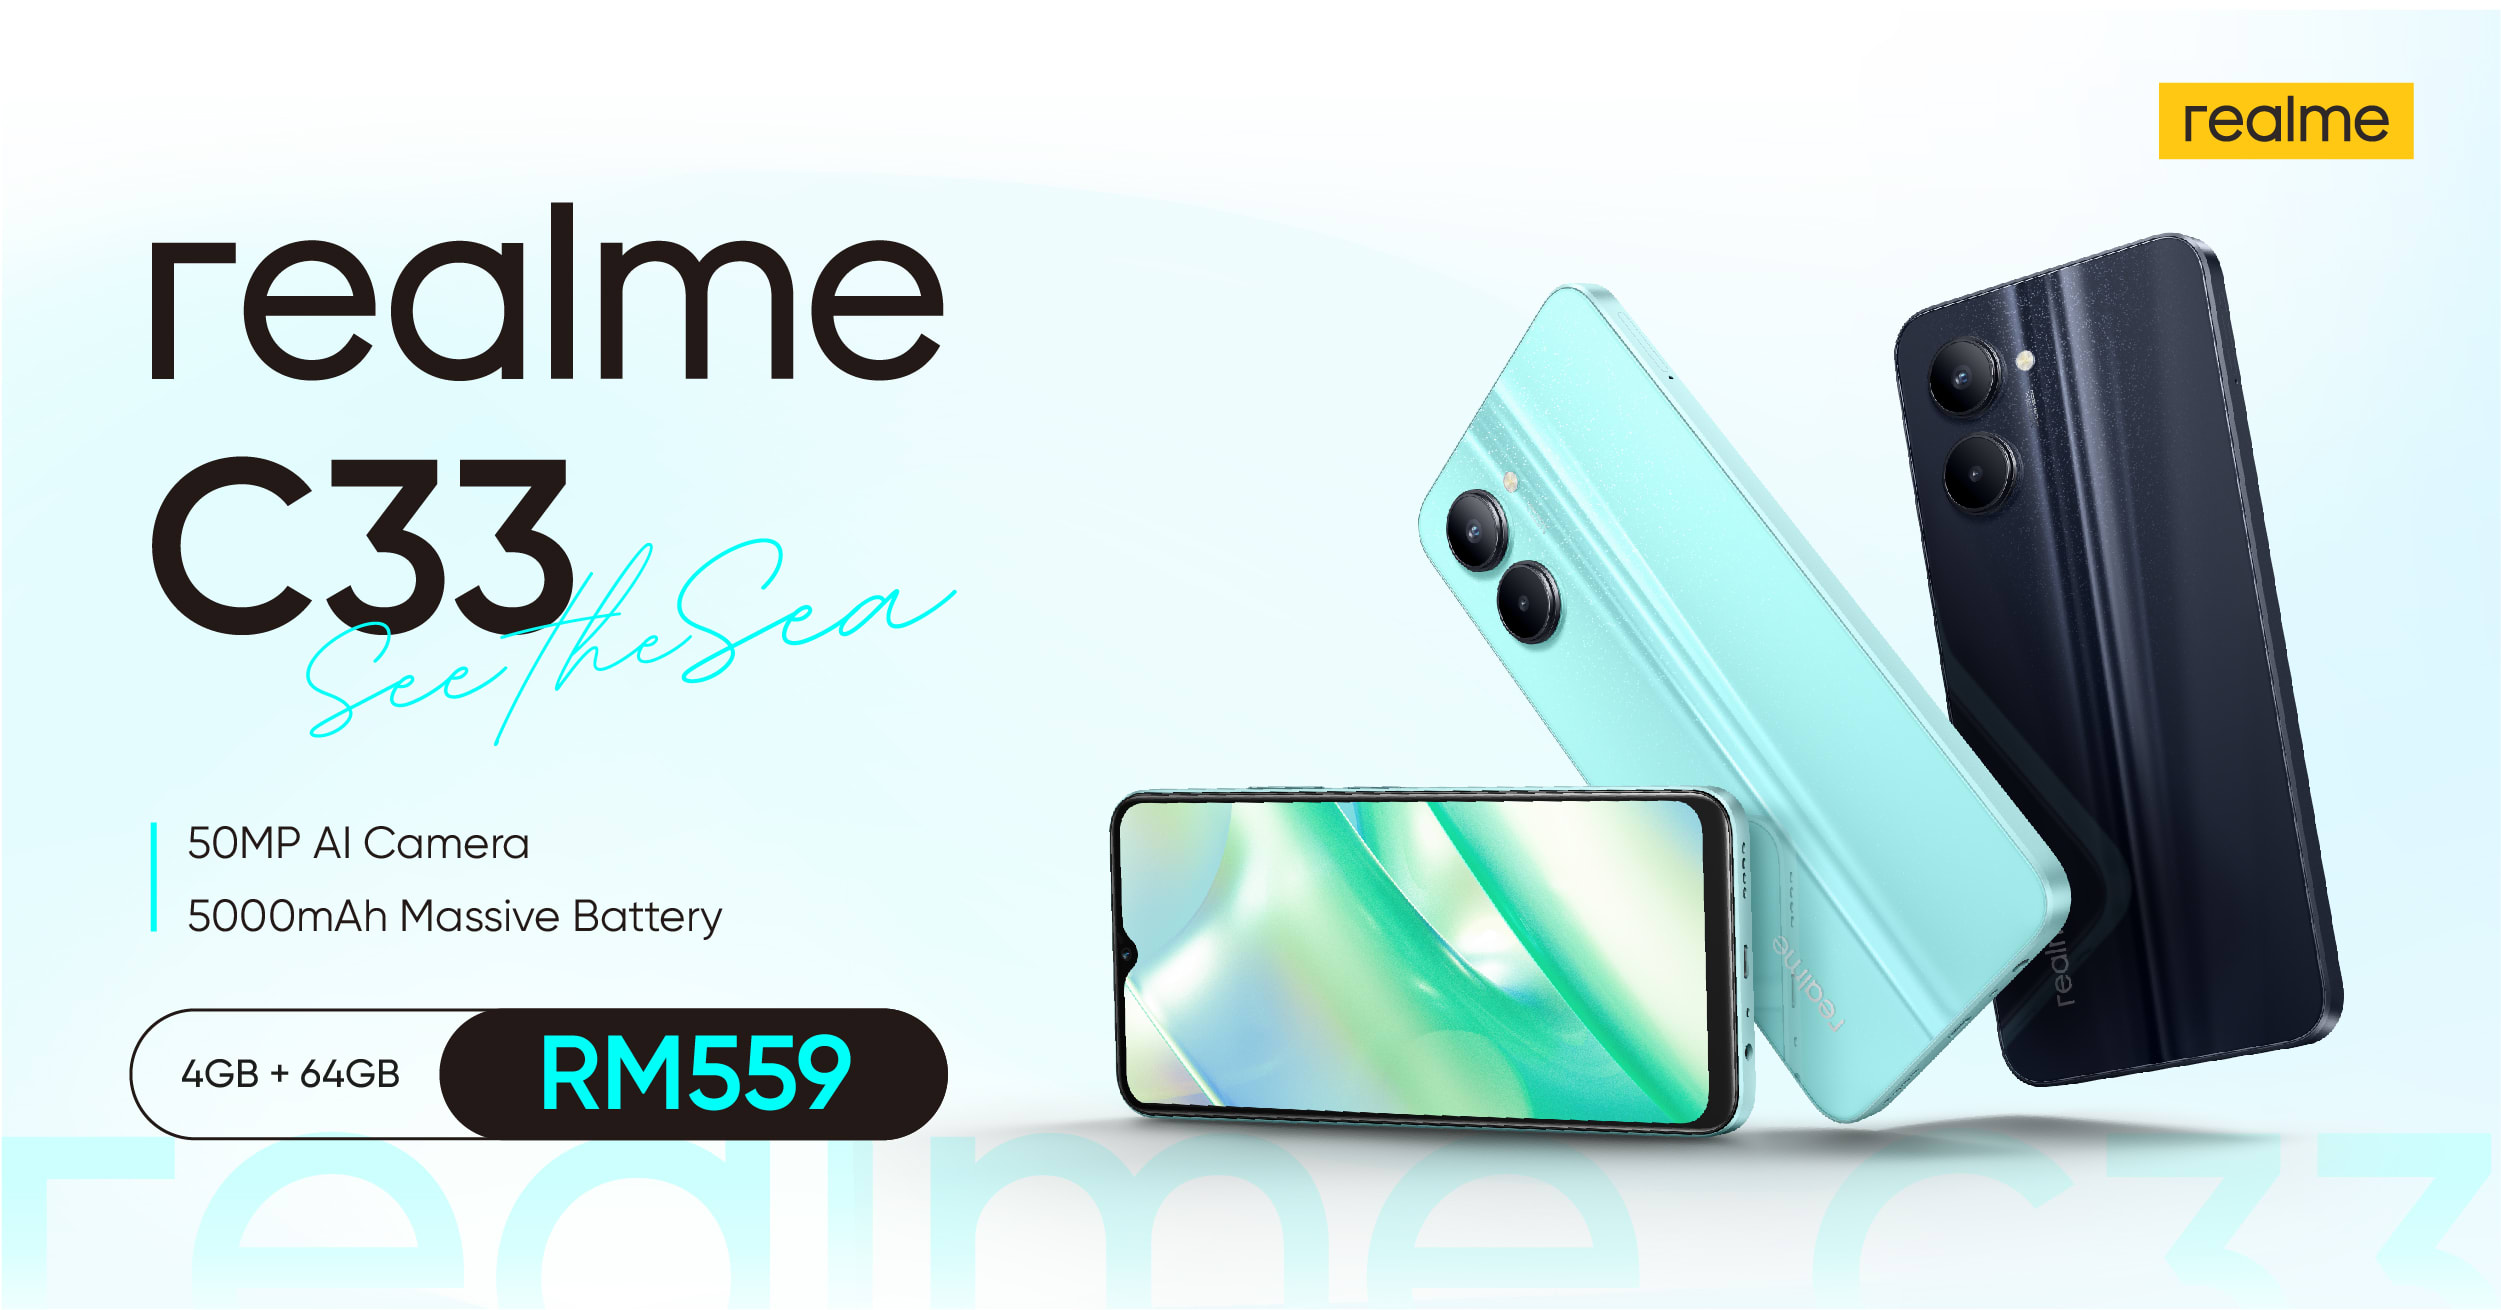 realme C33 specifications